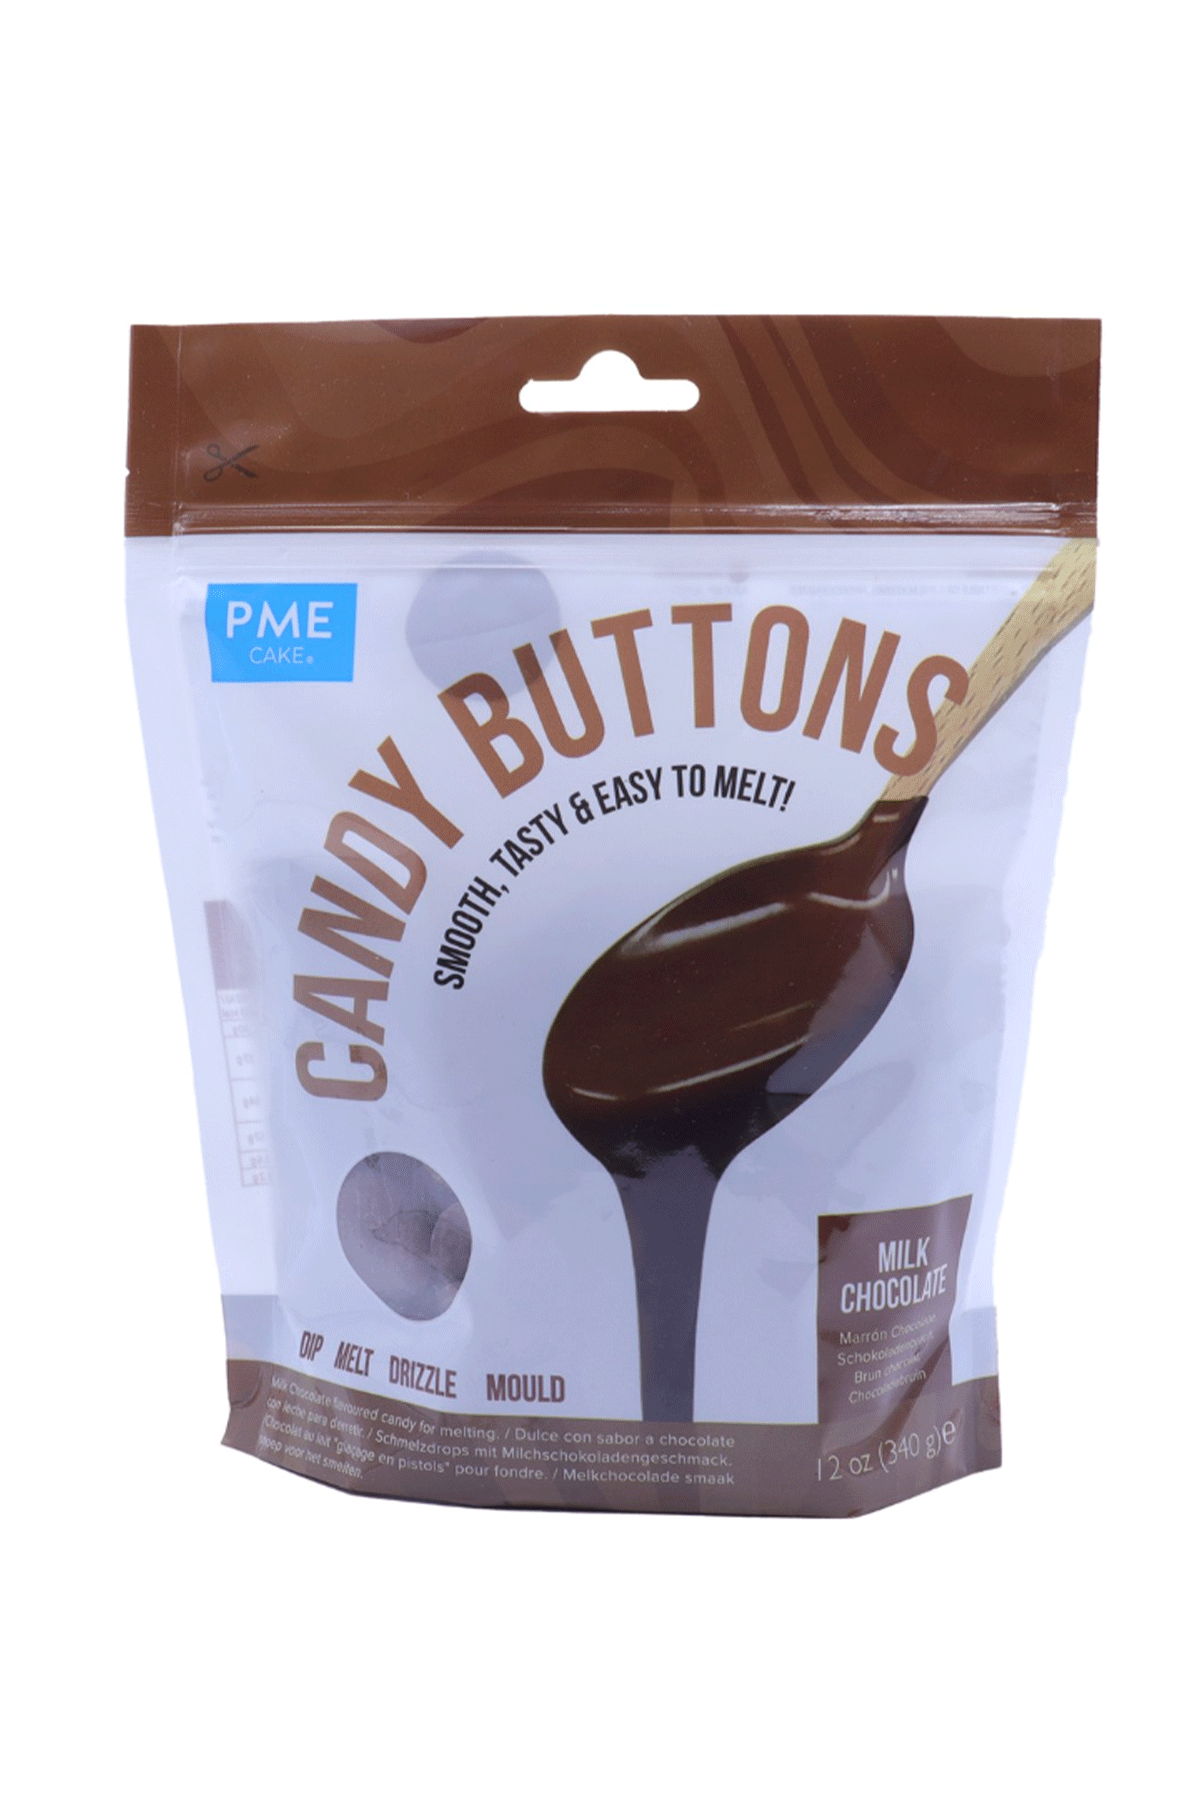 Candy Buttons - Milk Chocolate (284g/10 oz) PME